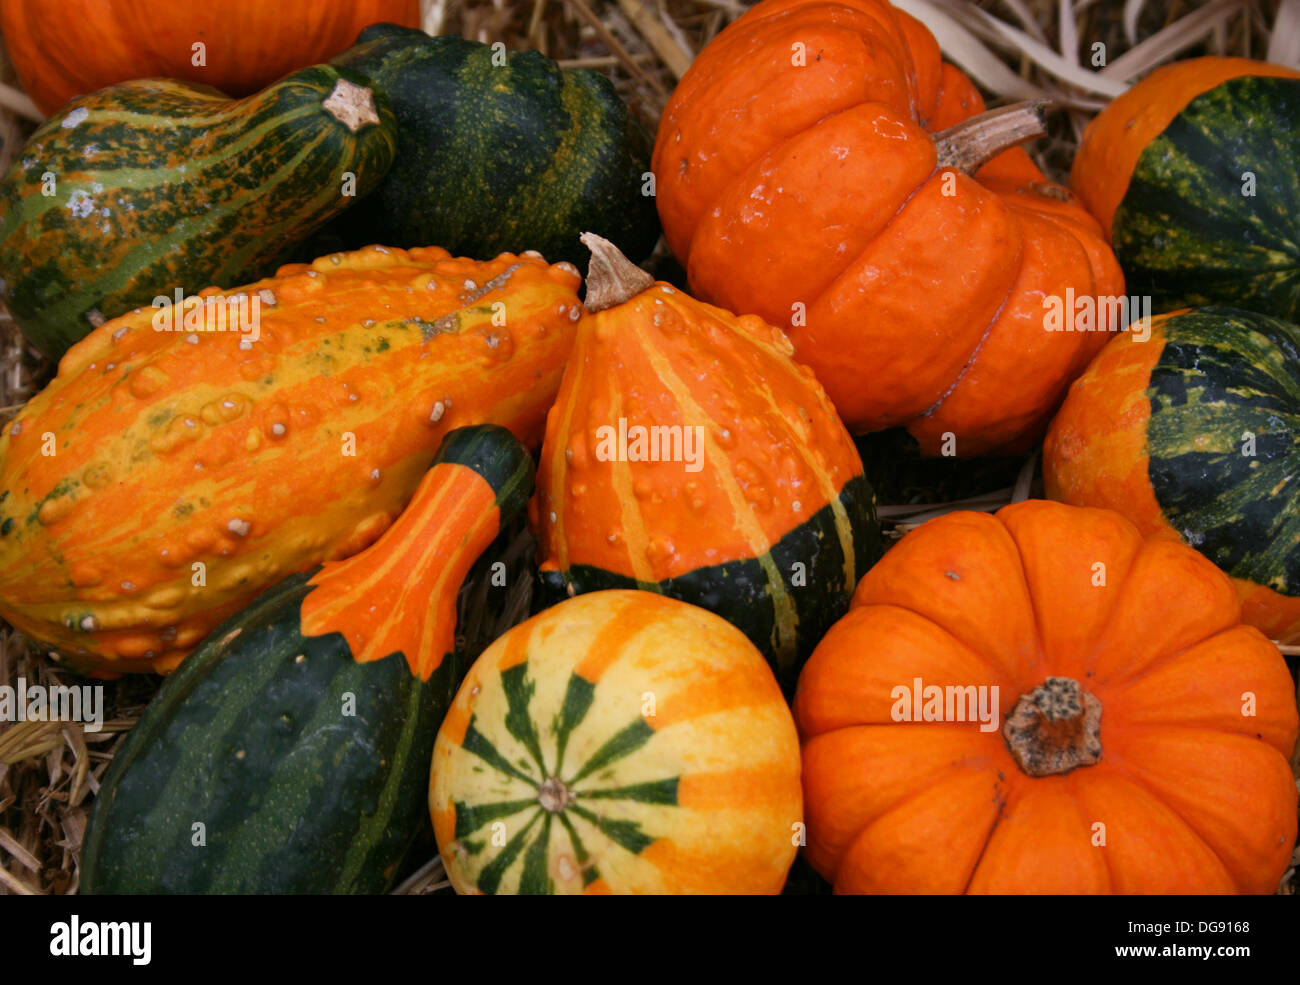 Close-up of group of small colorful gourds on hay bale. Stock Photo